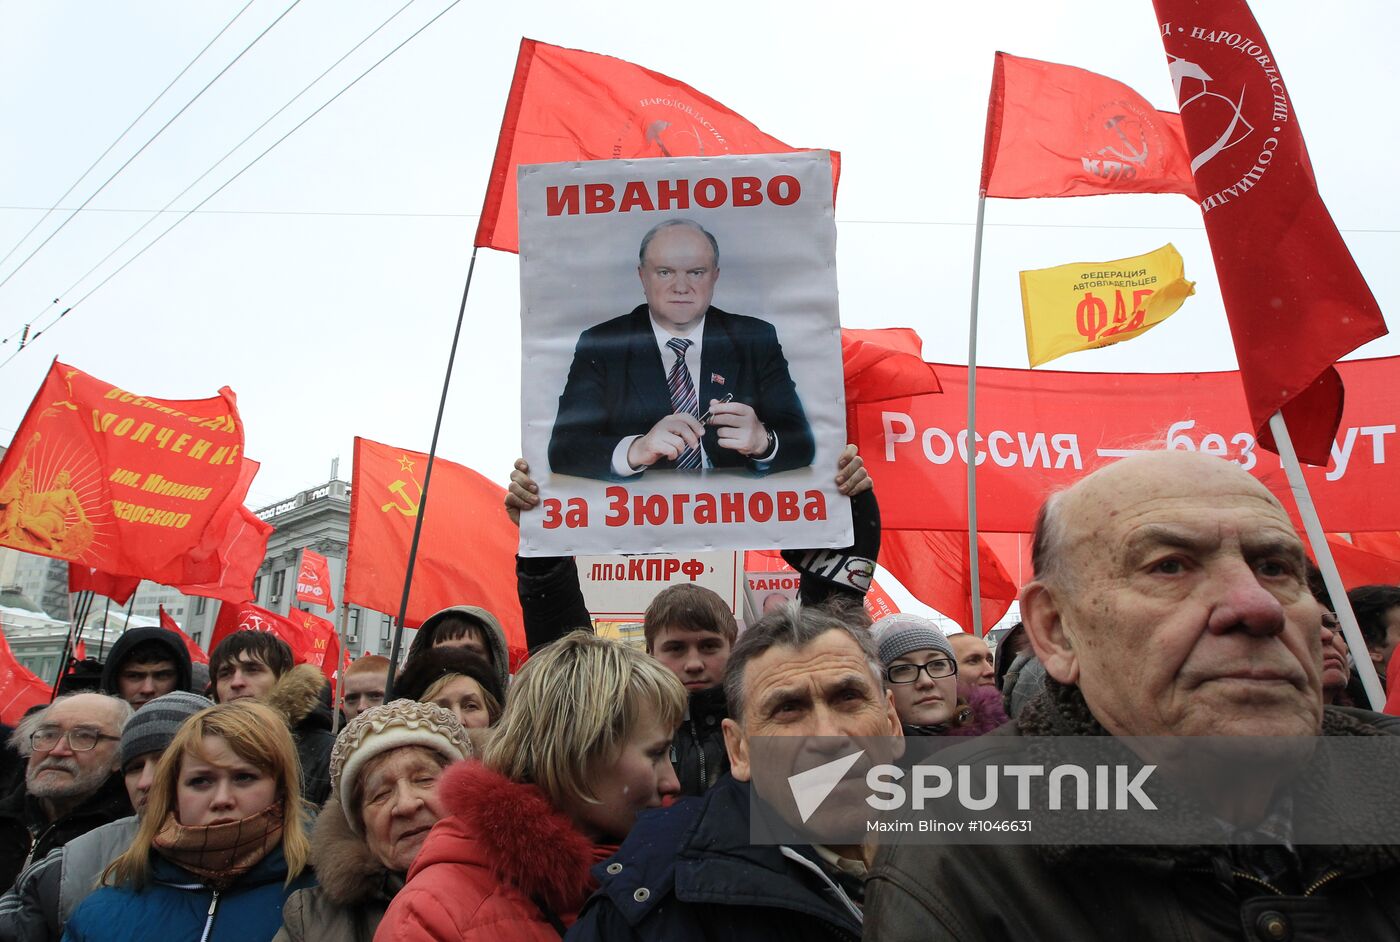 Communist Party supporters rally on Theater Square